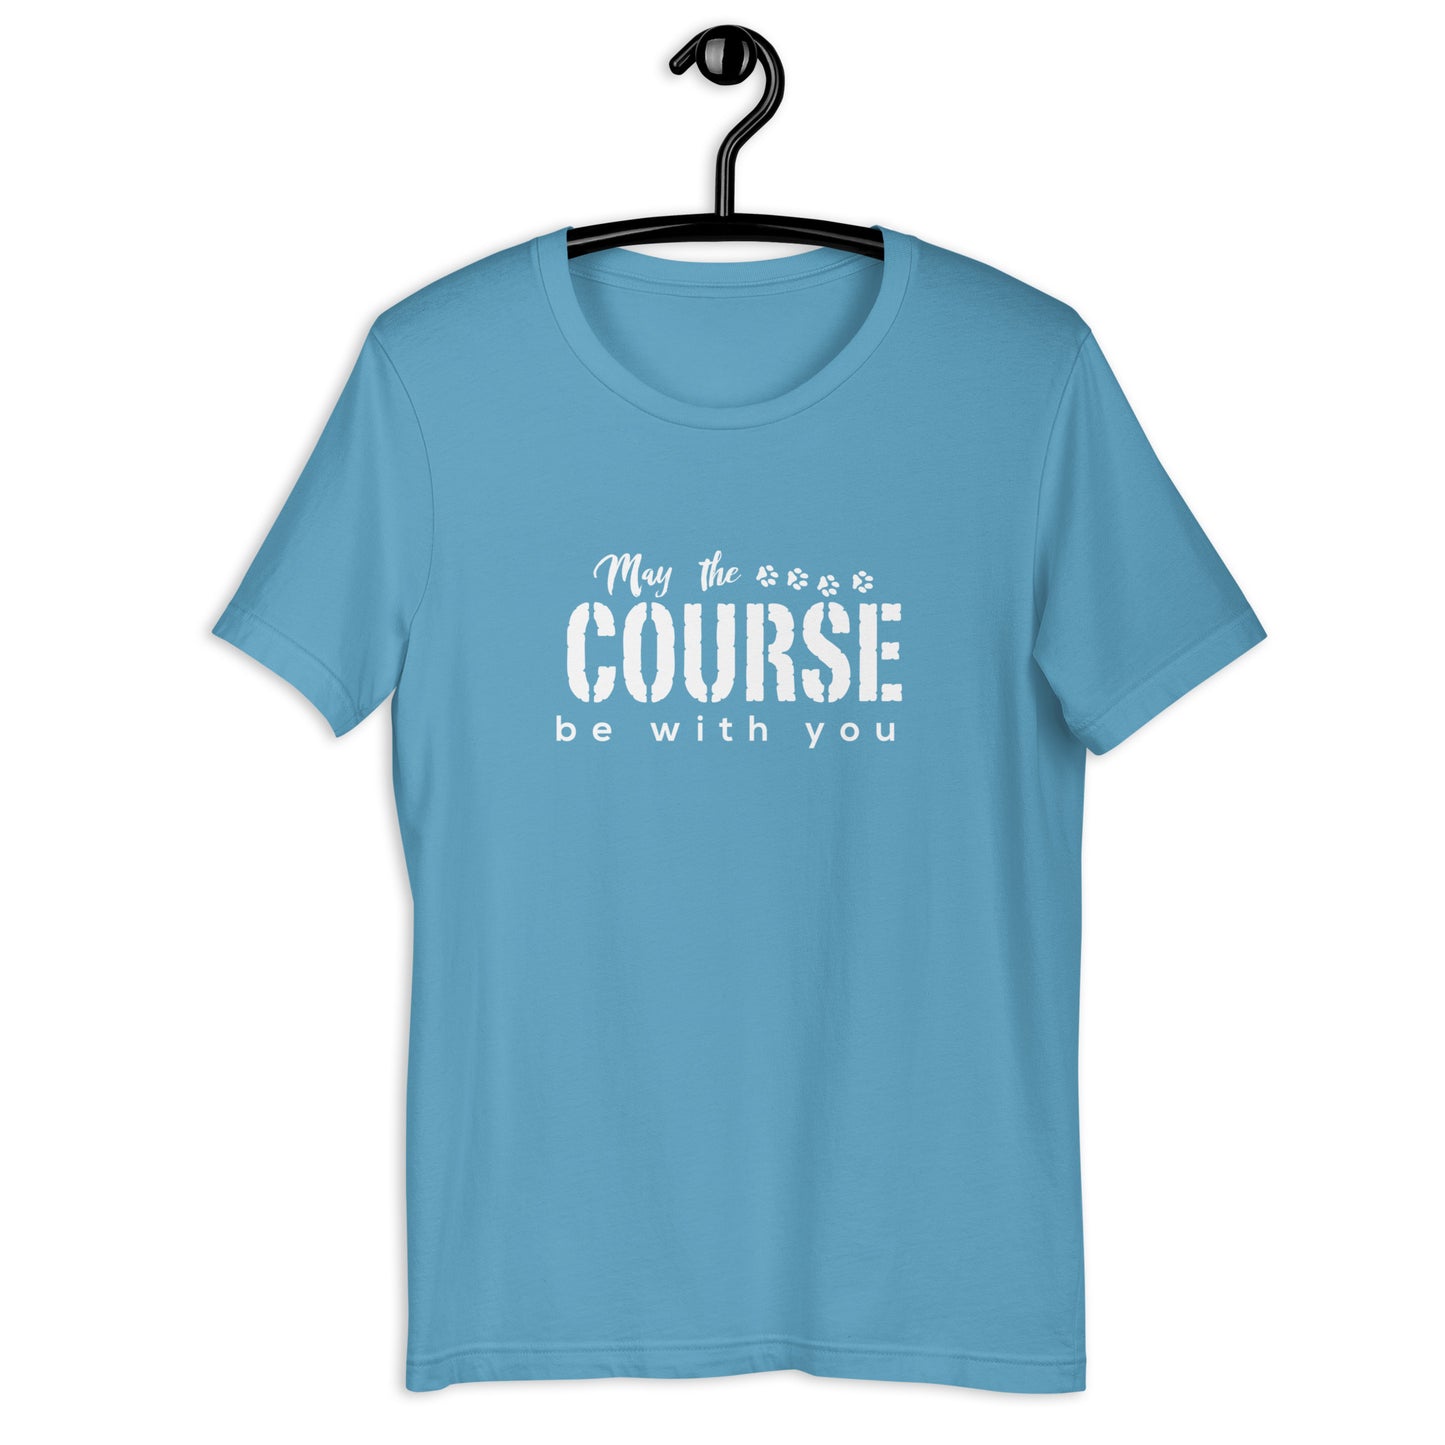 MAY THE COURSE - WHITE - Unisex t-shirt